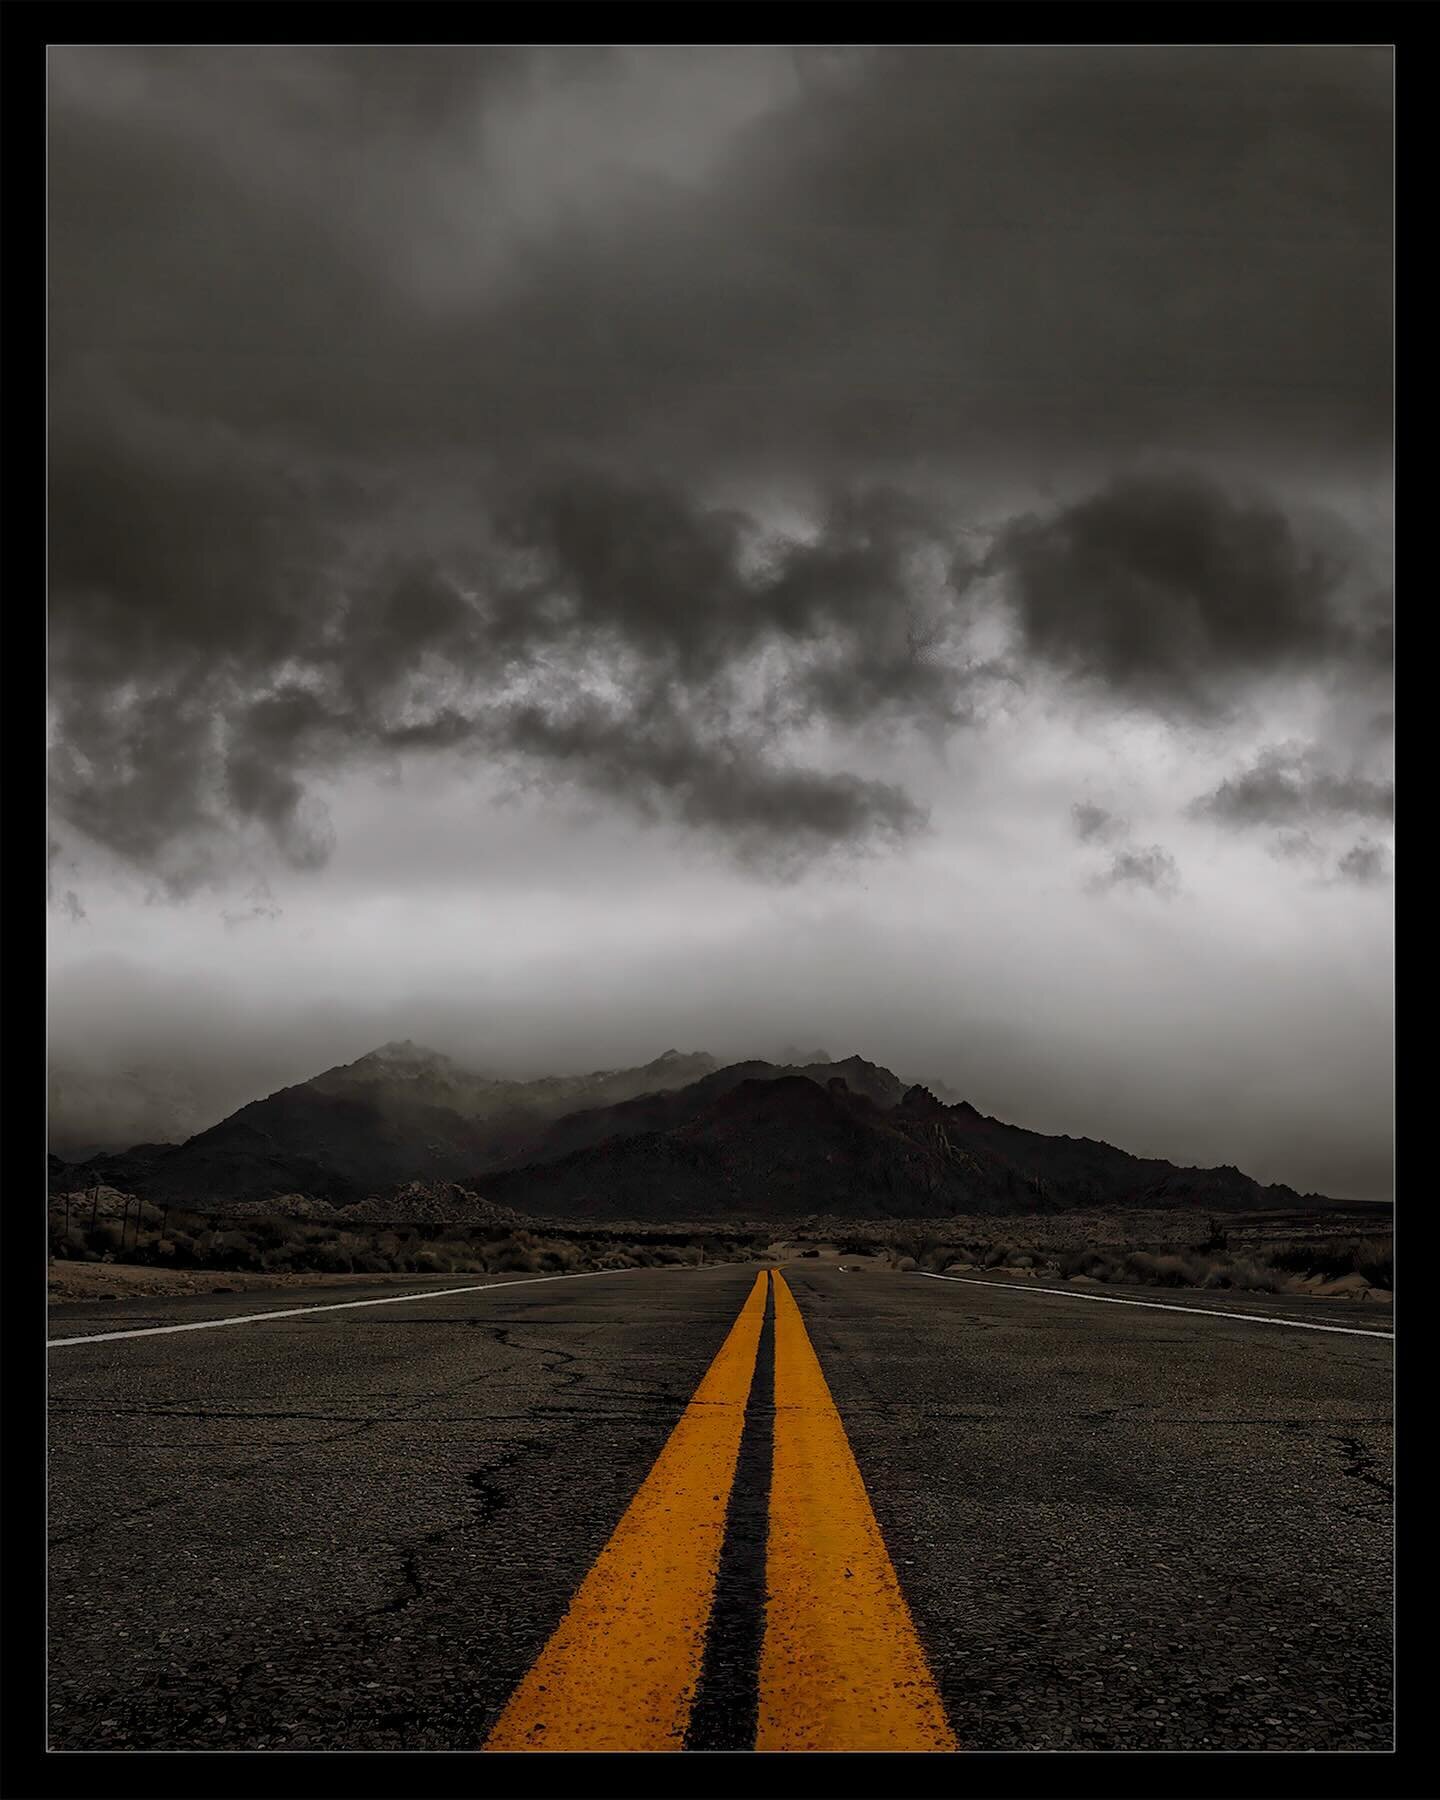 A quick stop in the middle of nowhere!

03.15.2024

#artofvisuals #moodygrams #moodyedits #nikonusa #todayscalifornia #californialove #desertvibes #rainstorm #ourplanetdaily #goldenstate #middleoftheroad #middleofnowhere #desolate #faraway #offthebea